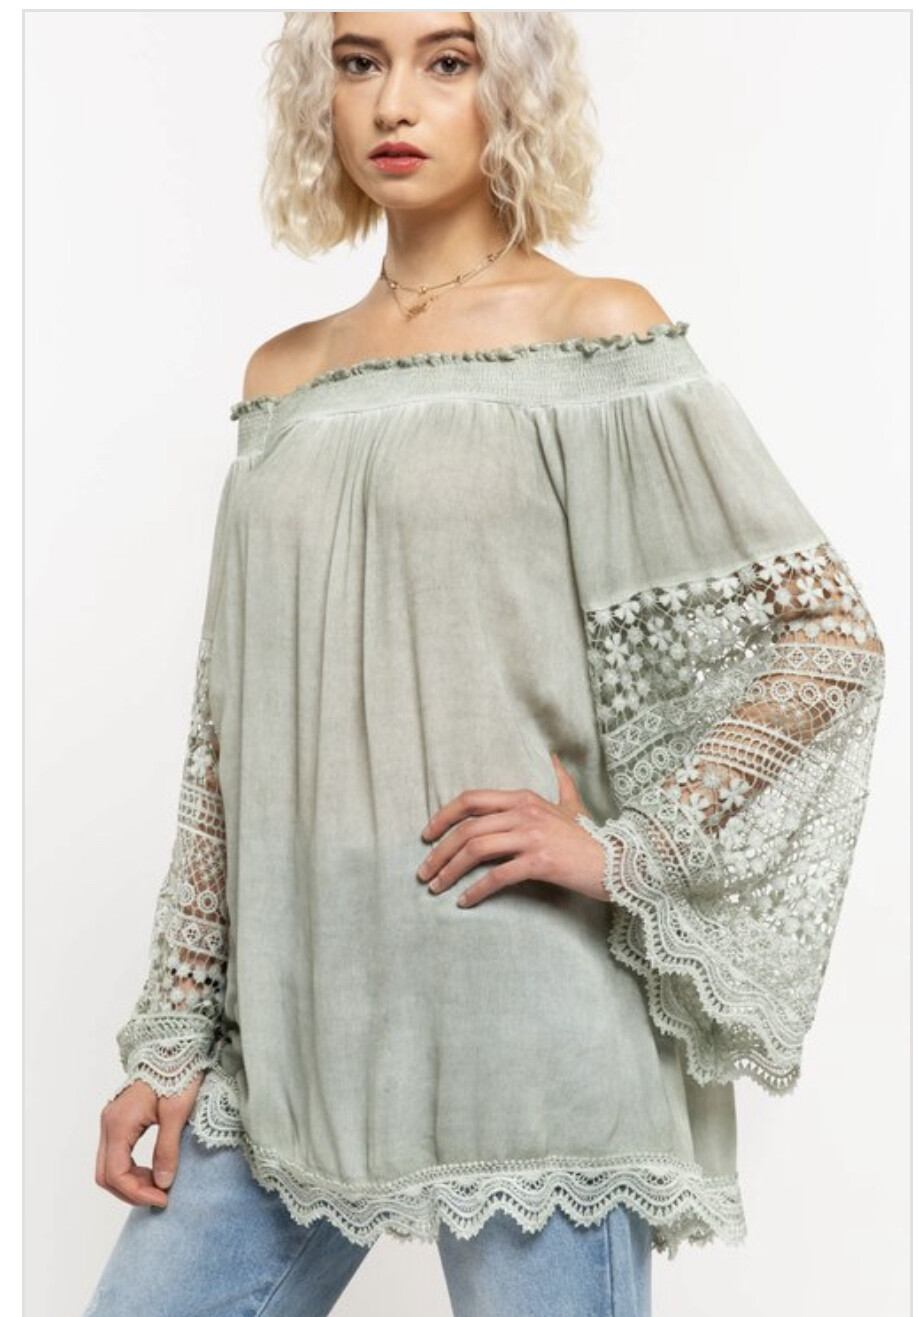 Lace sleeve peasant top